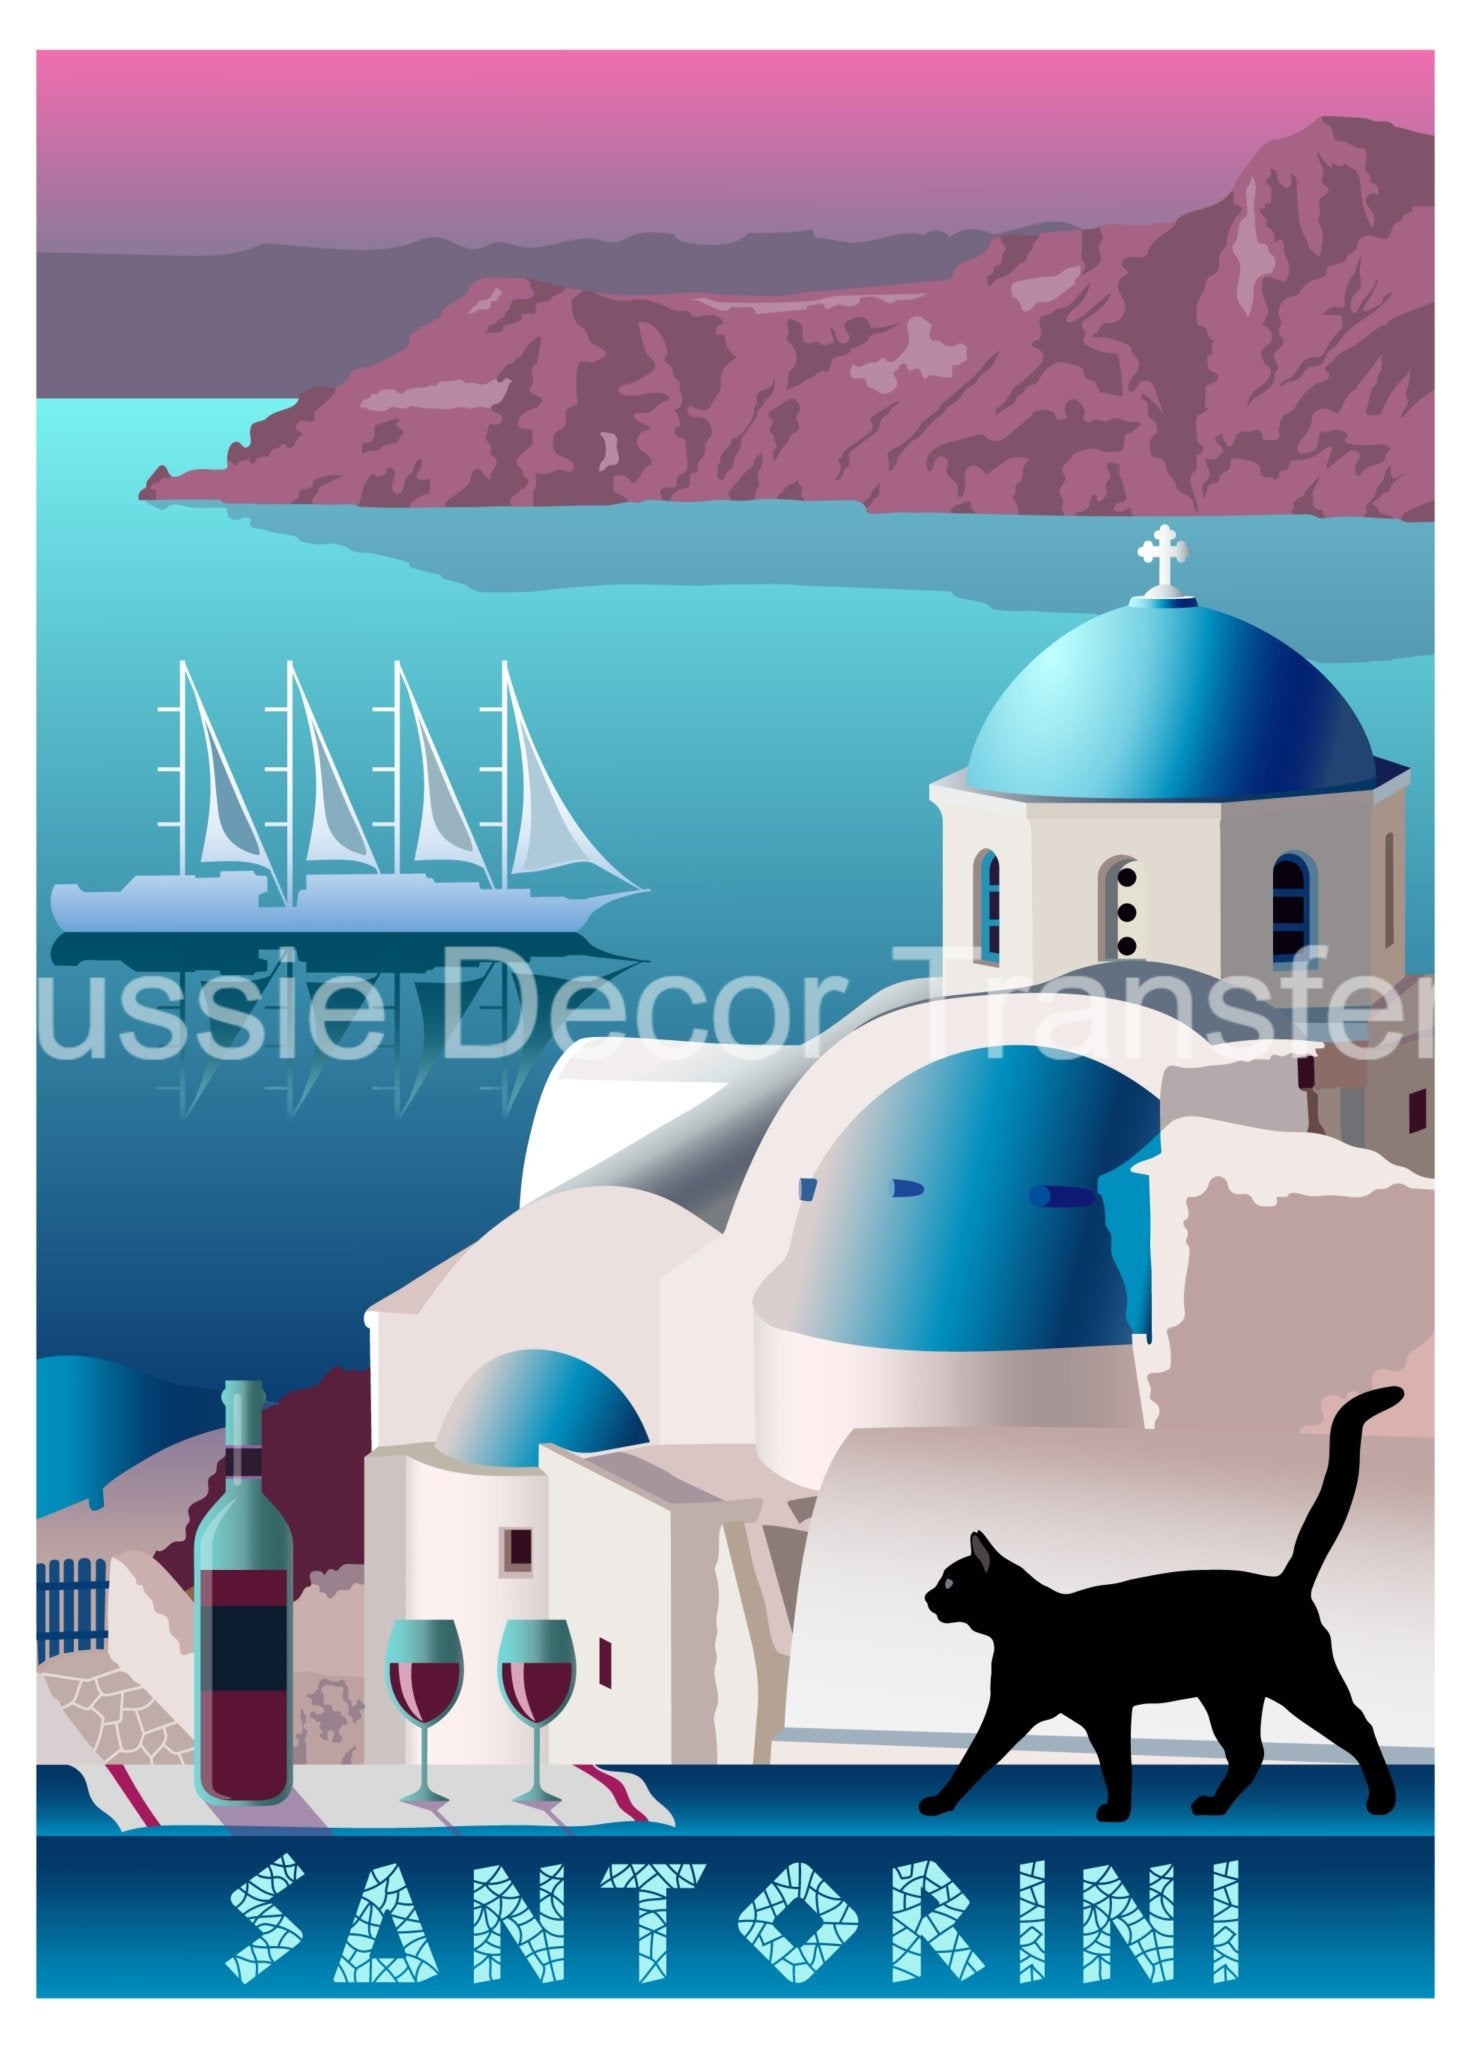 Aussie Decor Transfers Poster Print Santorini Poster - Not Your Average Poster Print! - AUS Only